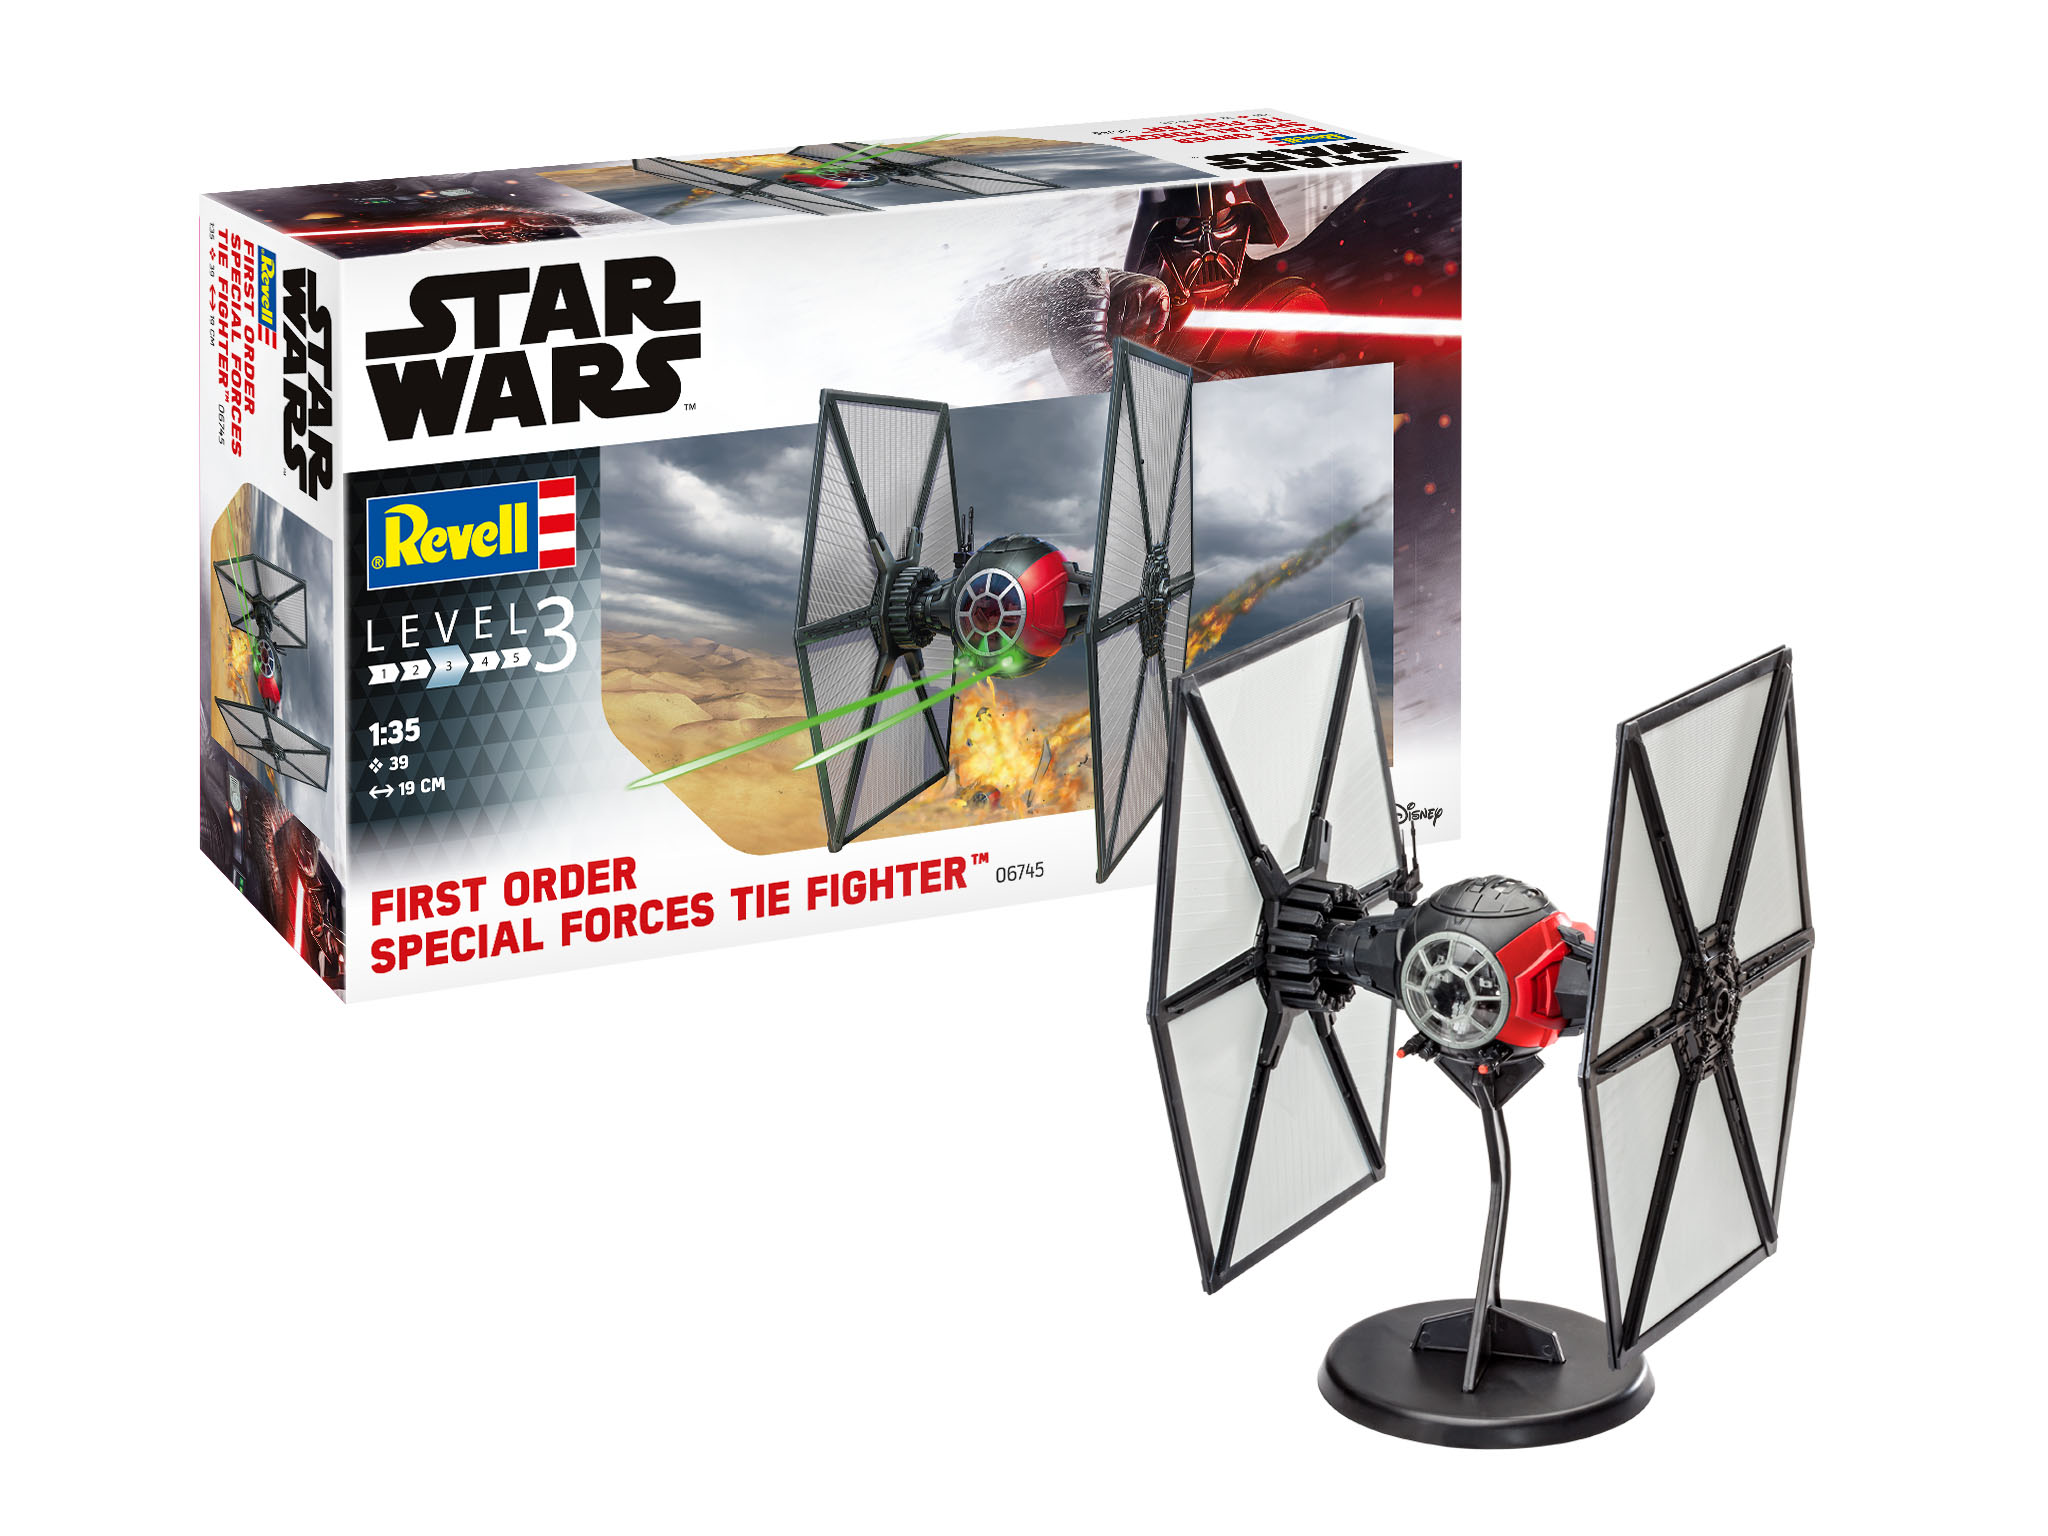 Revell Episode VII First Order Special Forces TIE Fighter Building Kit 